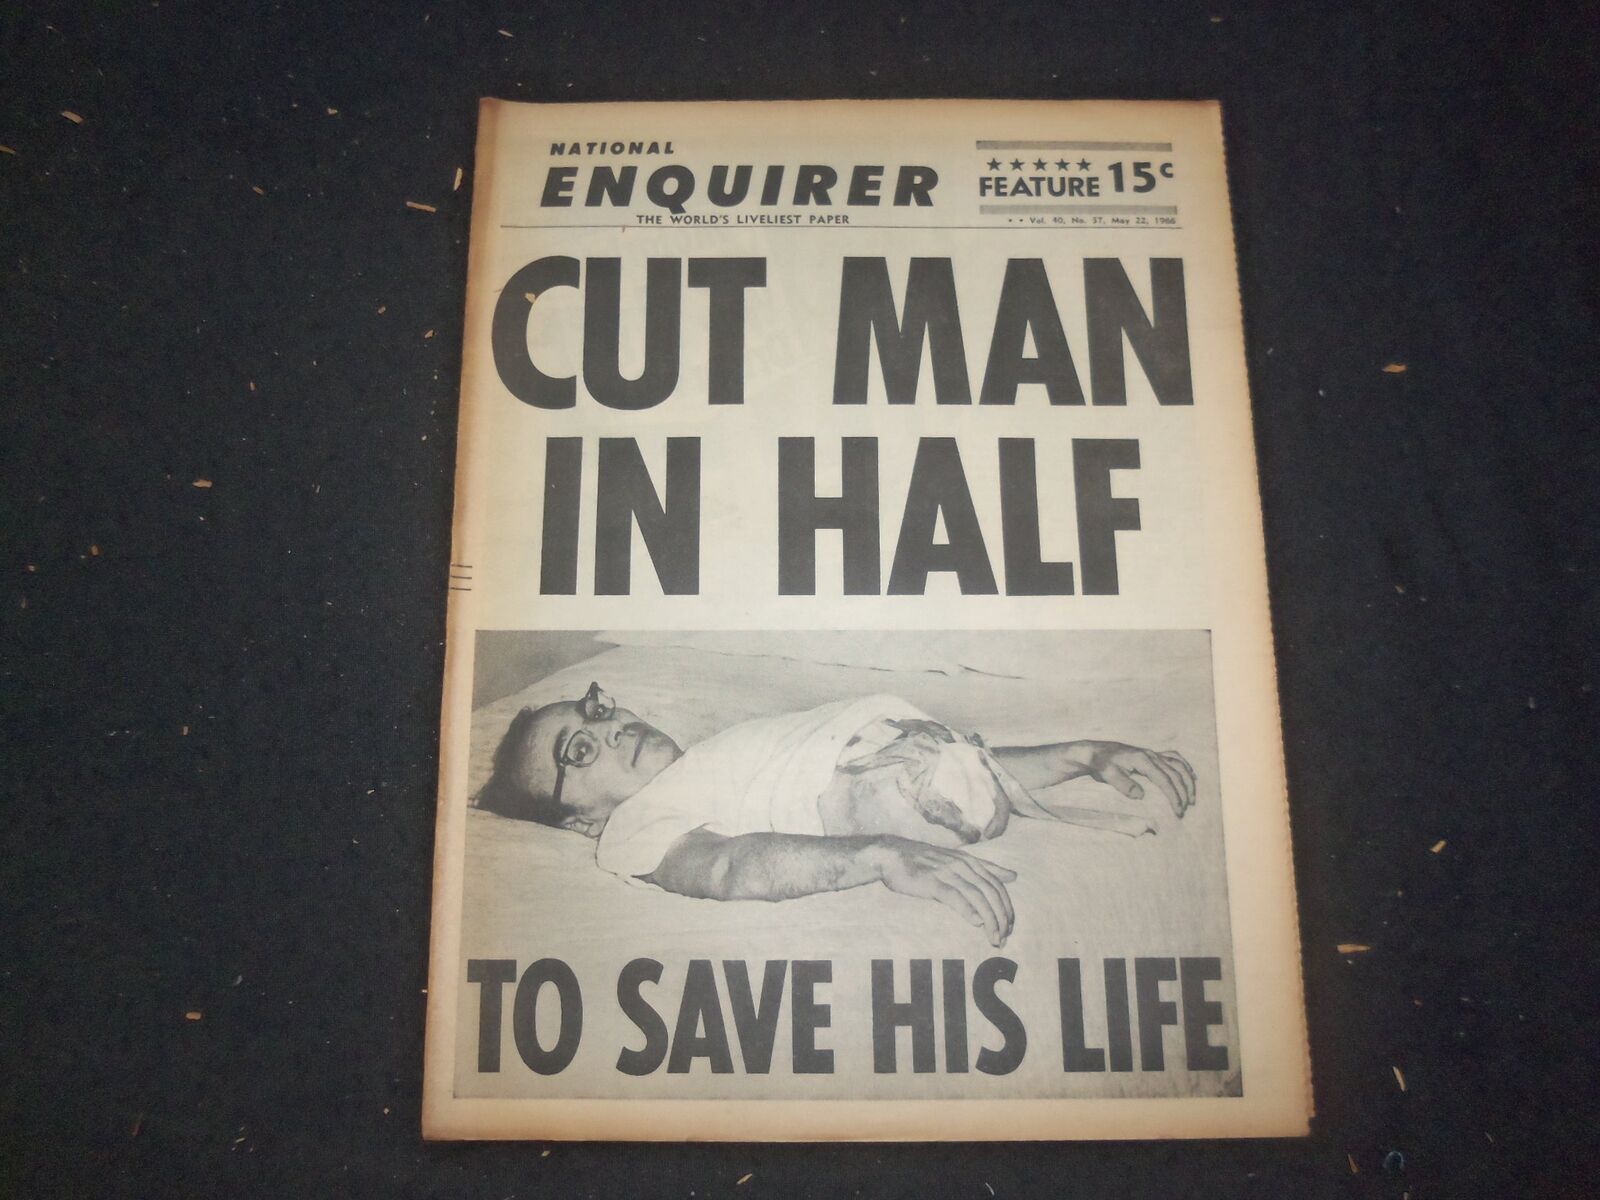 1966 MAY 22 NATIONAL ENQUIRER NEWSPAPER - CUT MAN IN HALF TO SAVE LIFE - NP 7413